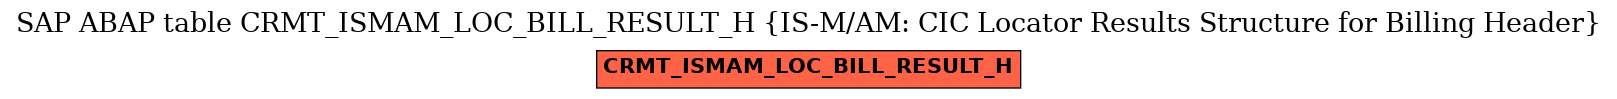 E-R Diagram for table CRMT_ISMAM_LOC_BILL_RESULT_H (IS-M/AM: CIC Locator Results Structure for Billing Header)